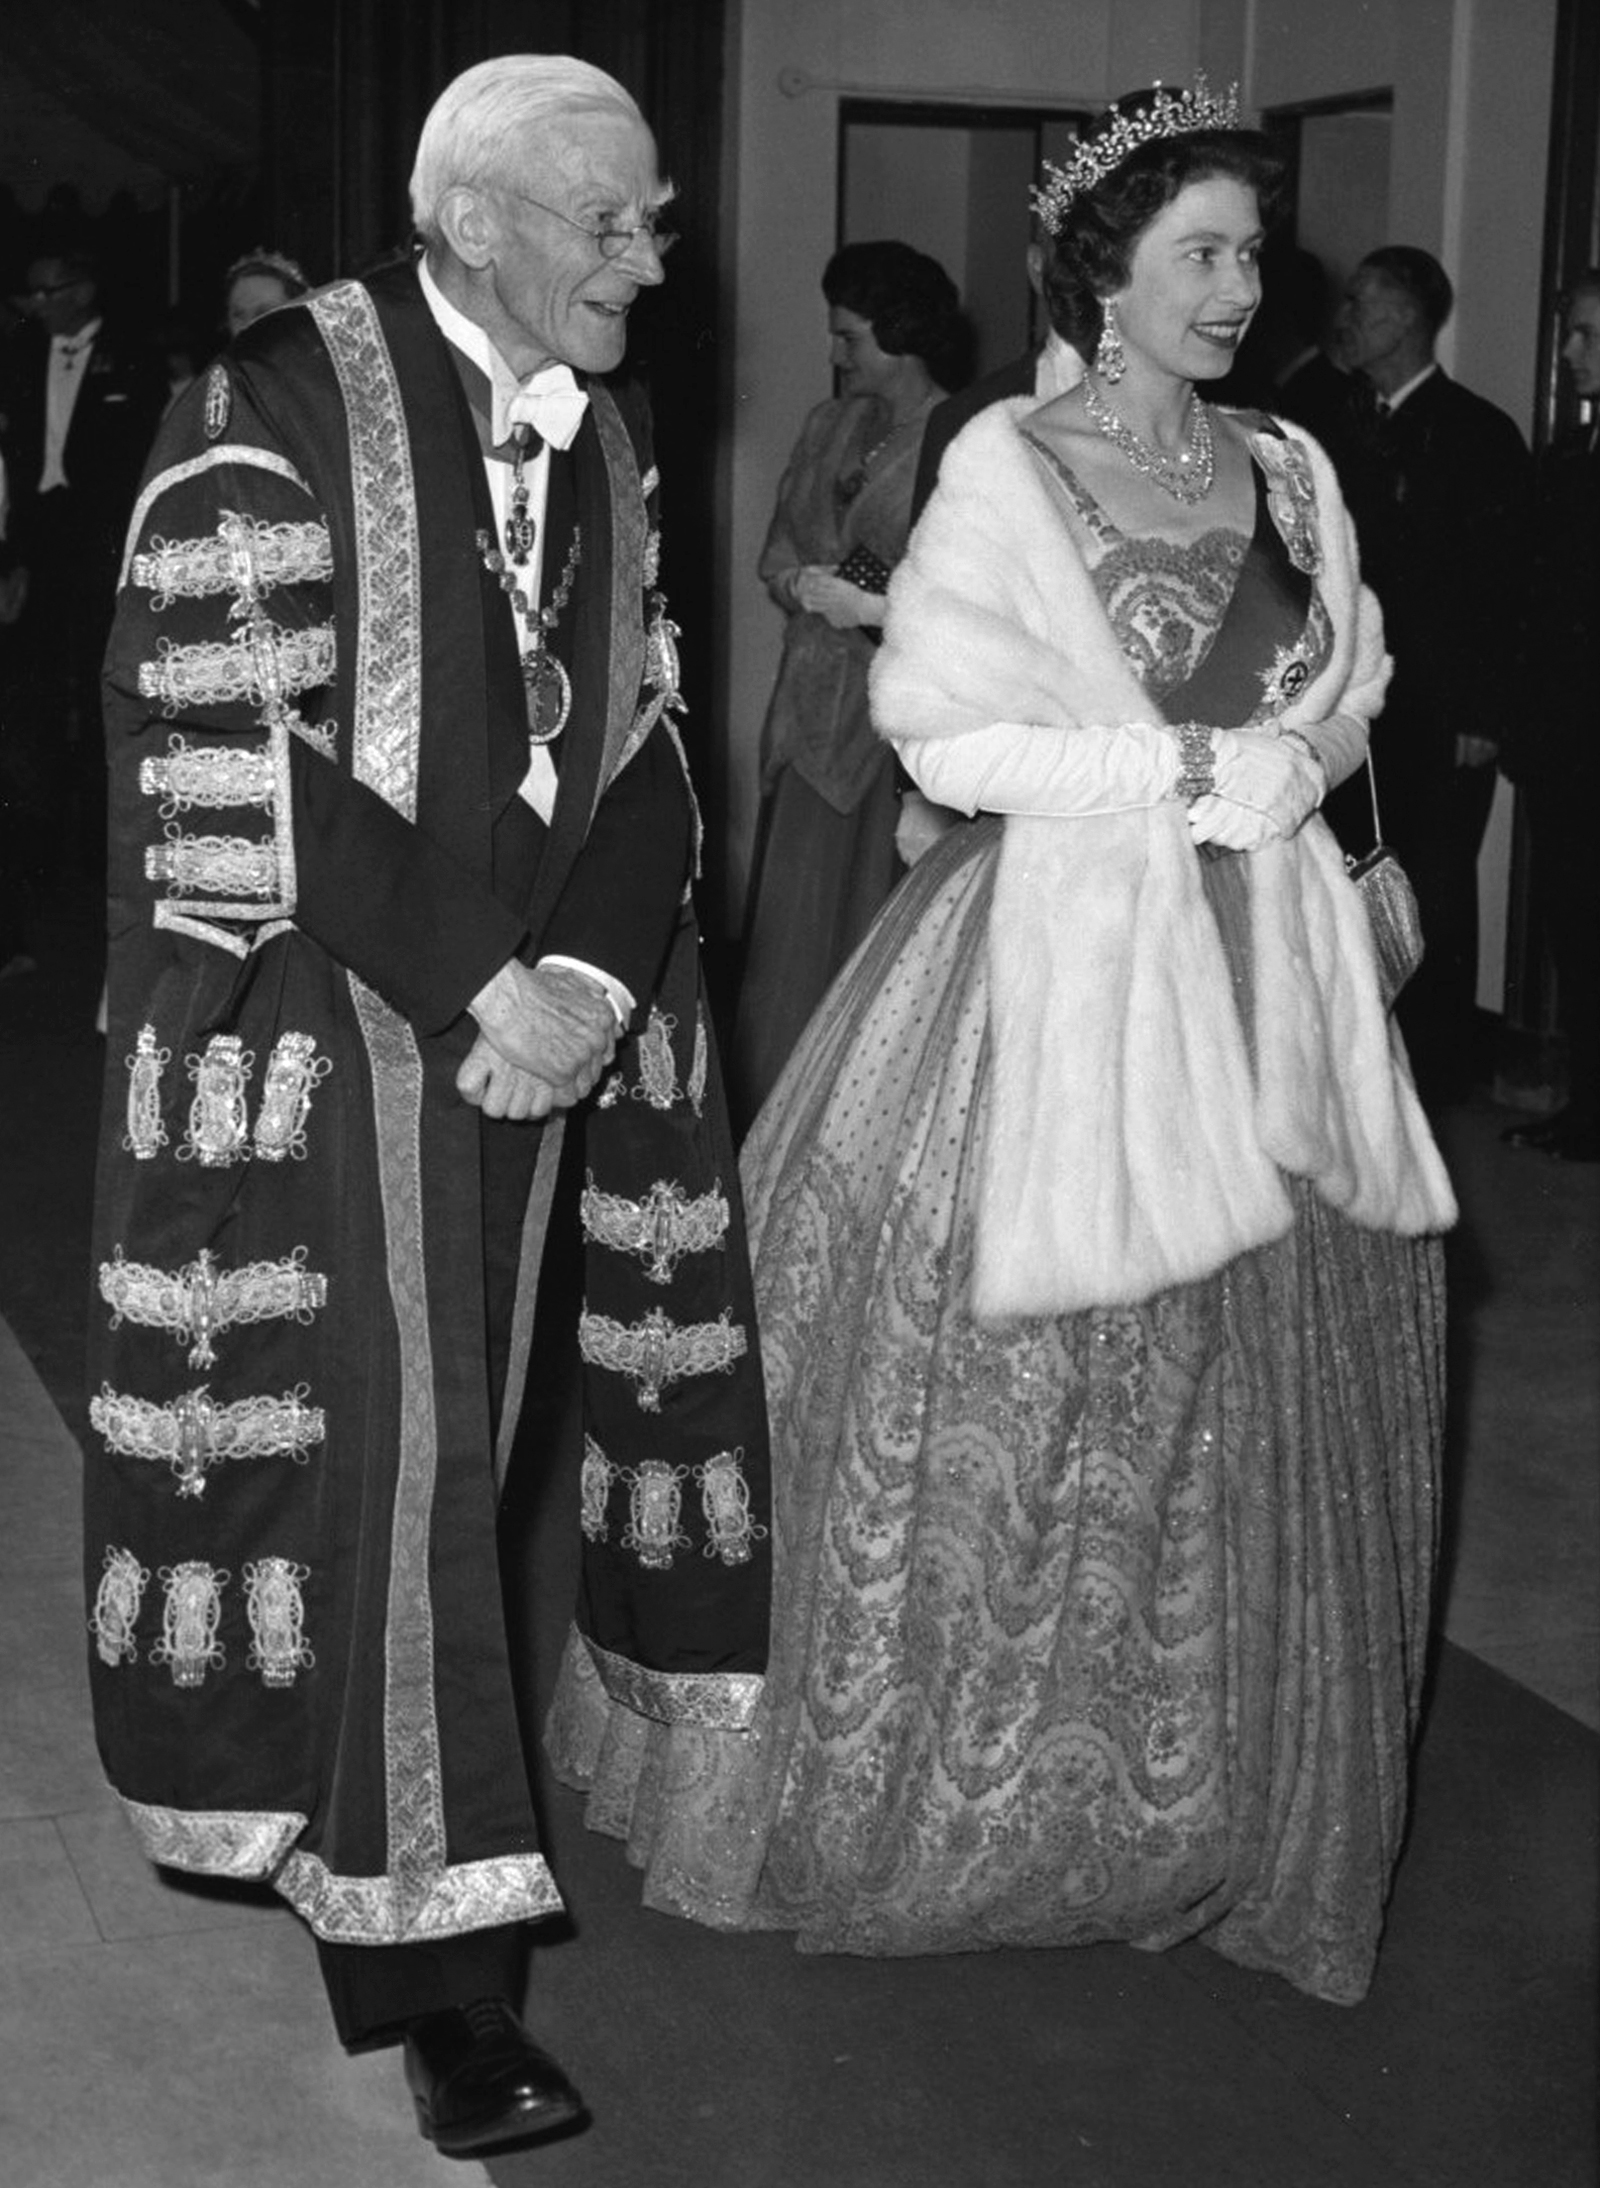 On 21 May 1962 Queen Elizabeth II joined a celebration at the RSM to mark the 50th anniversary of the opening of the building in 1912 by King George V and Queen Mary.